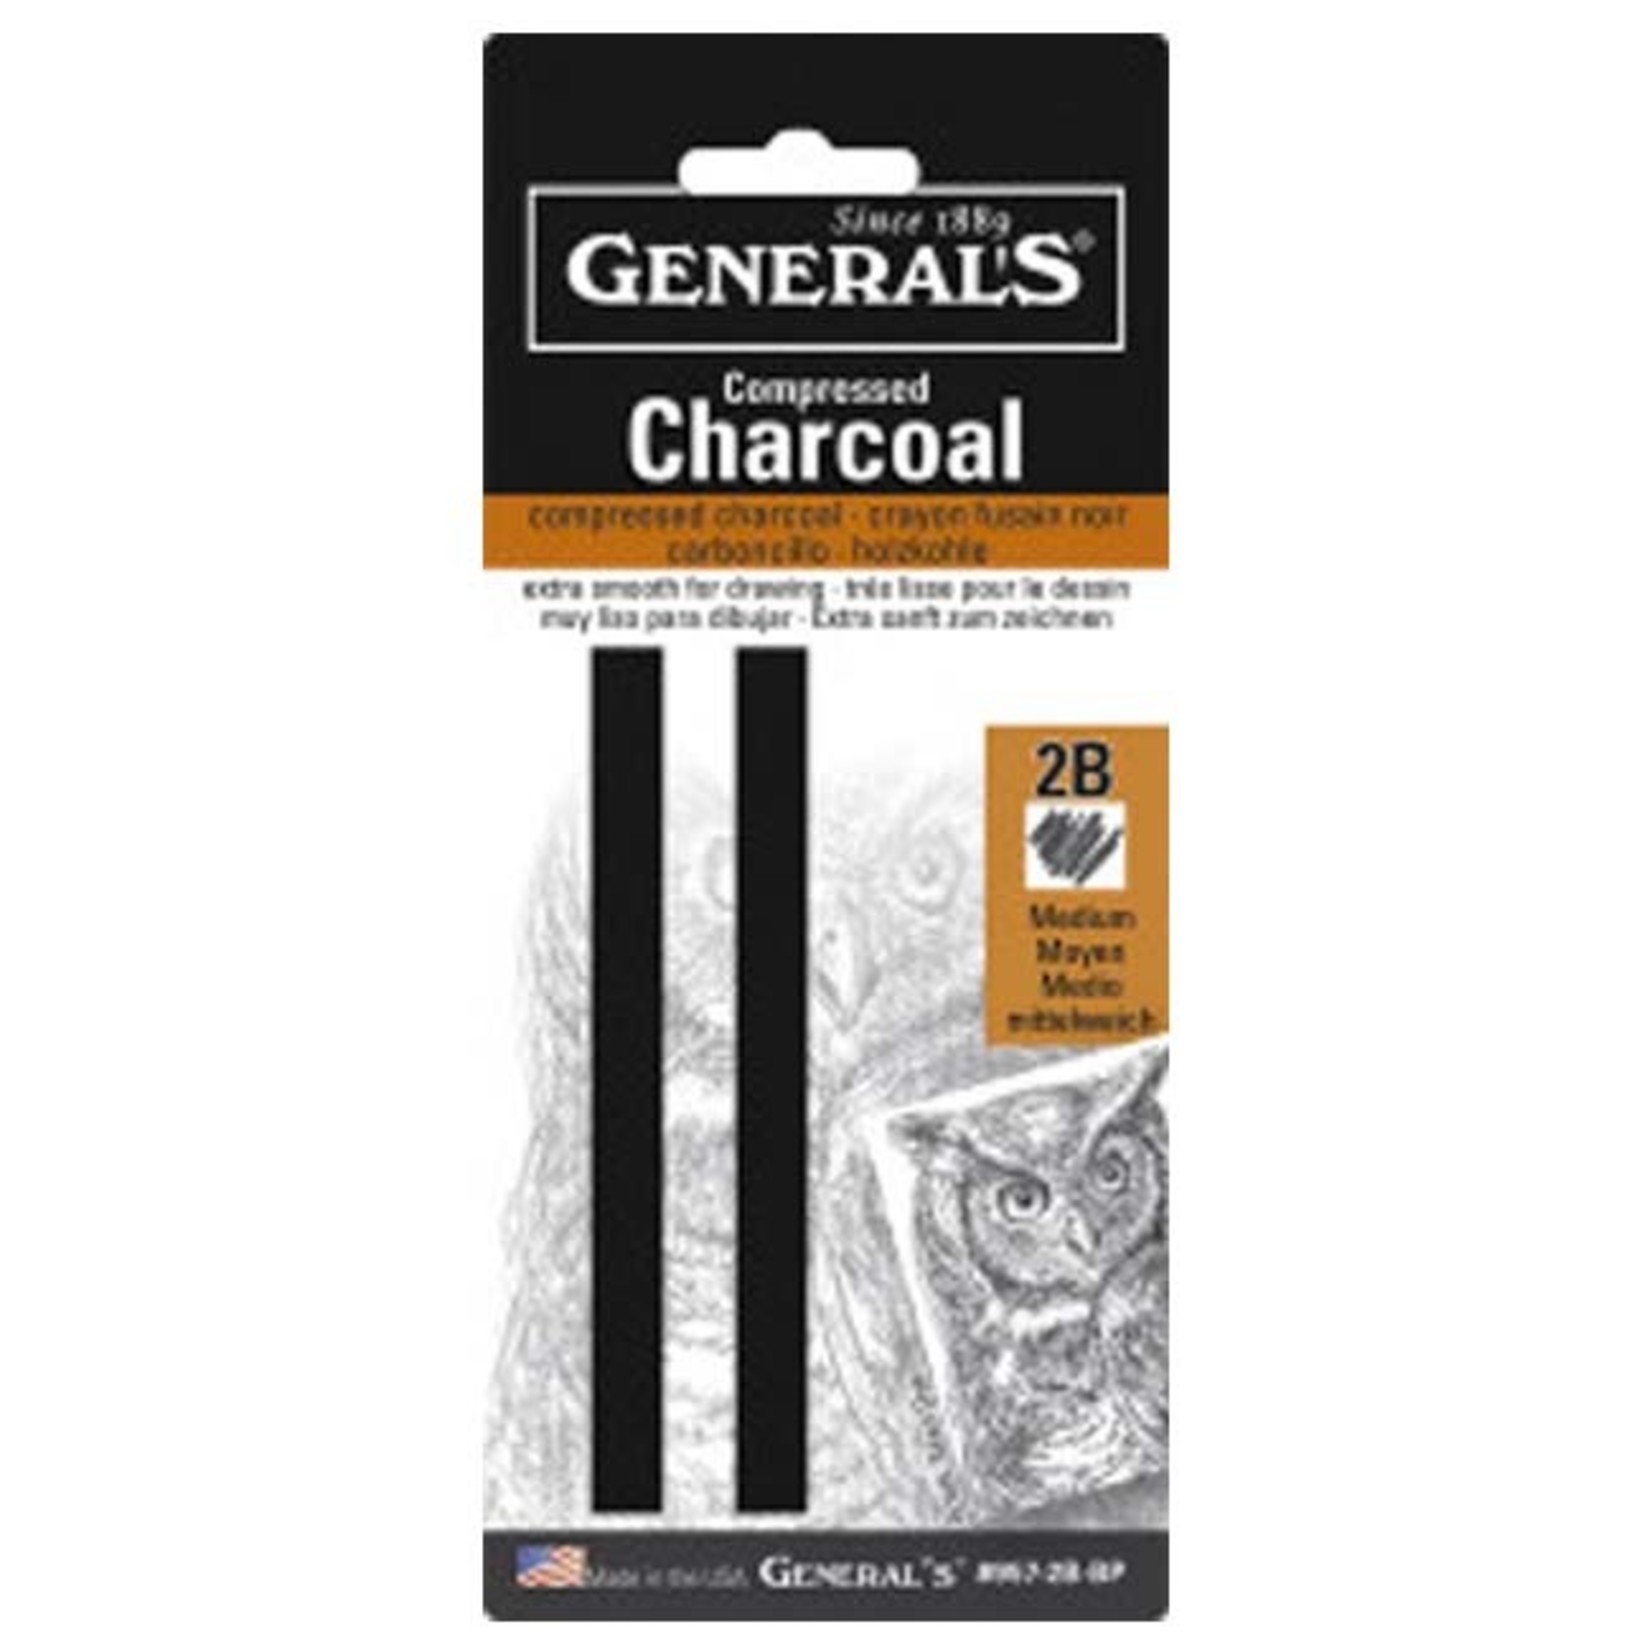 GENERAL'S COMPRESSED CHARCOAL 2/PK 2B